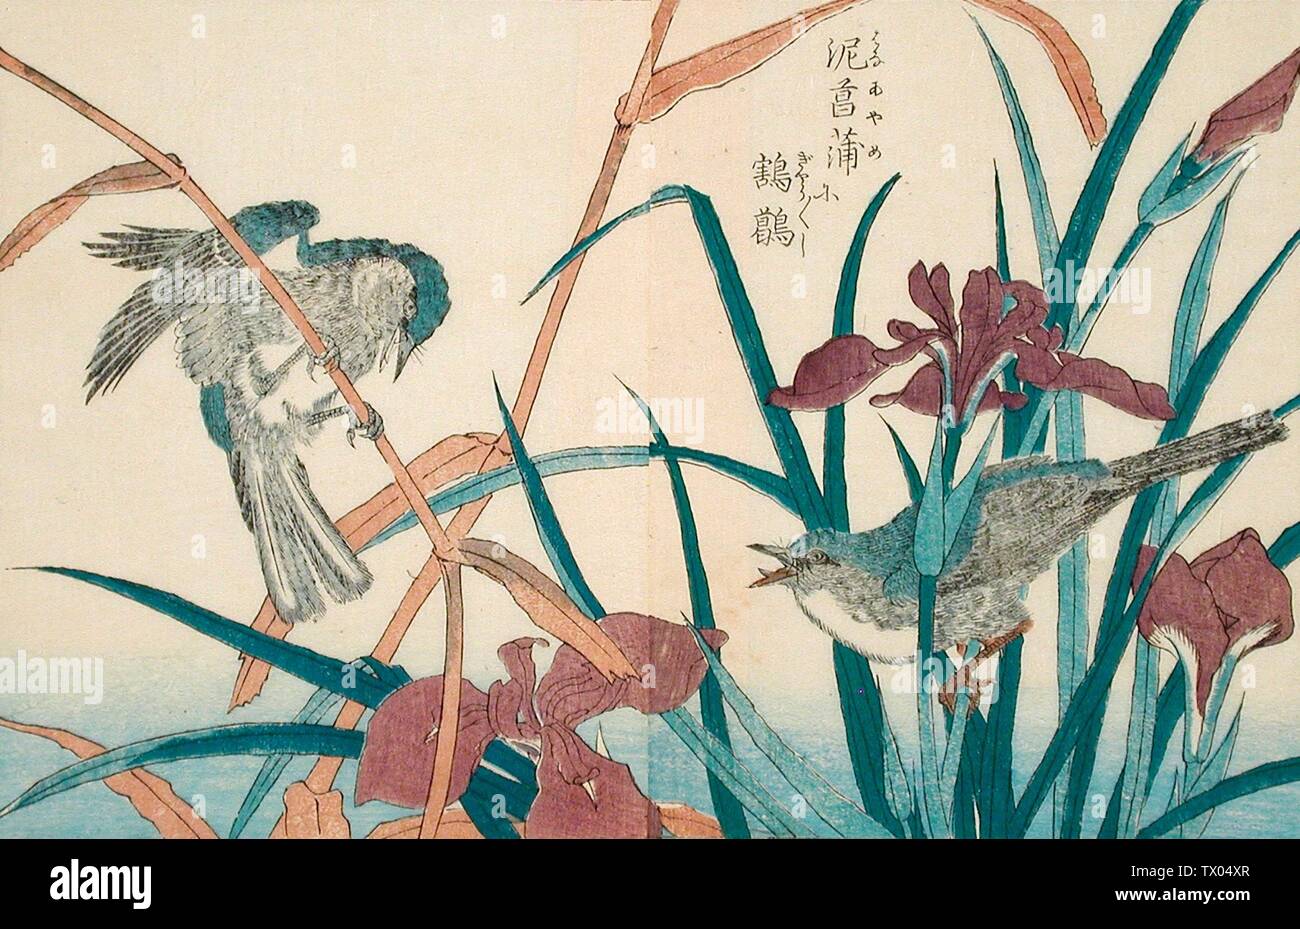 Birds and Iris;  Japan, 18th-19th century Prints; woodcuts Color woodbk prints; two pages from a book Image: 7 1/16 x 10 13/16 in. (17.9 x 27.4 cm); Sheet: 8 5/8 x 11 1/16 in. (21.9 x 28.0 cm) Gift in memory of Mary Thayer Gruys (AC1992.109.8.1-.2) Japanese Art; 18th-19th century; Stock Photo